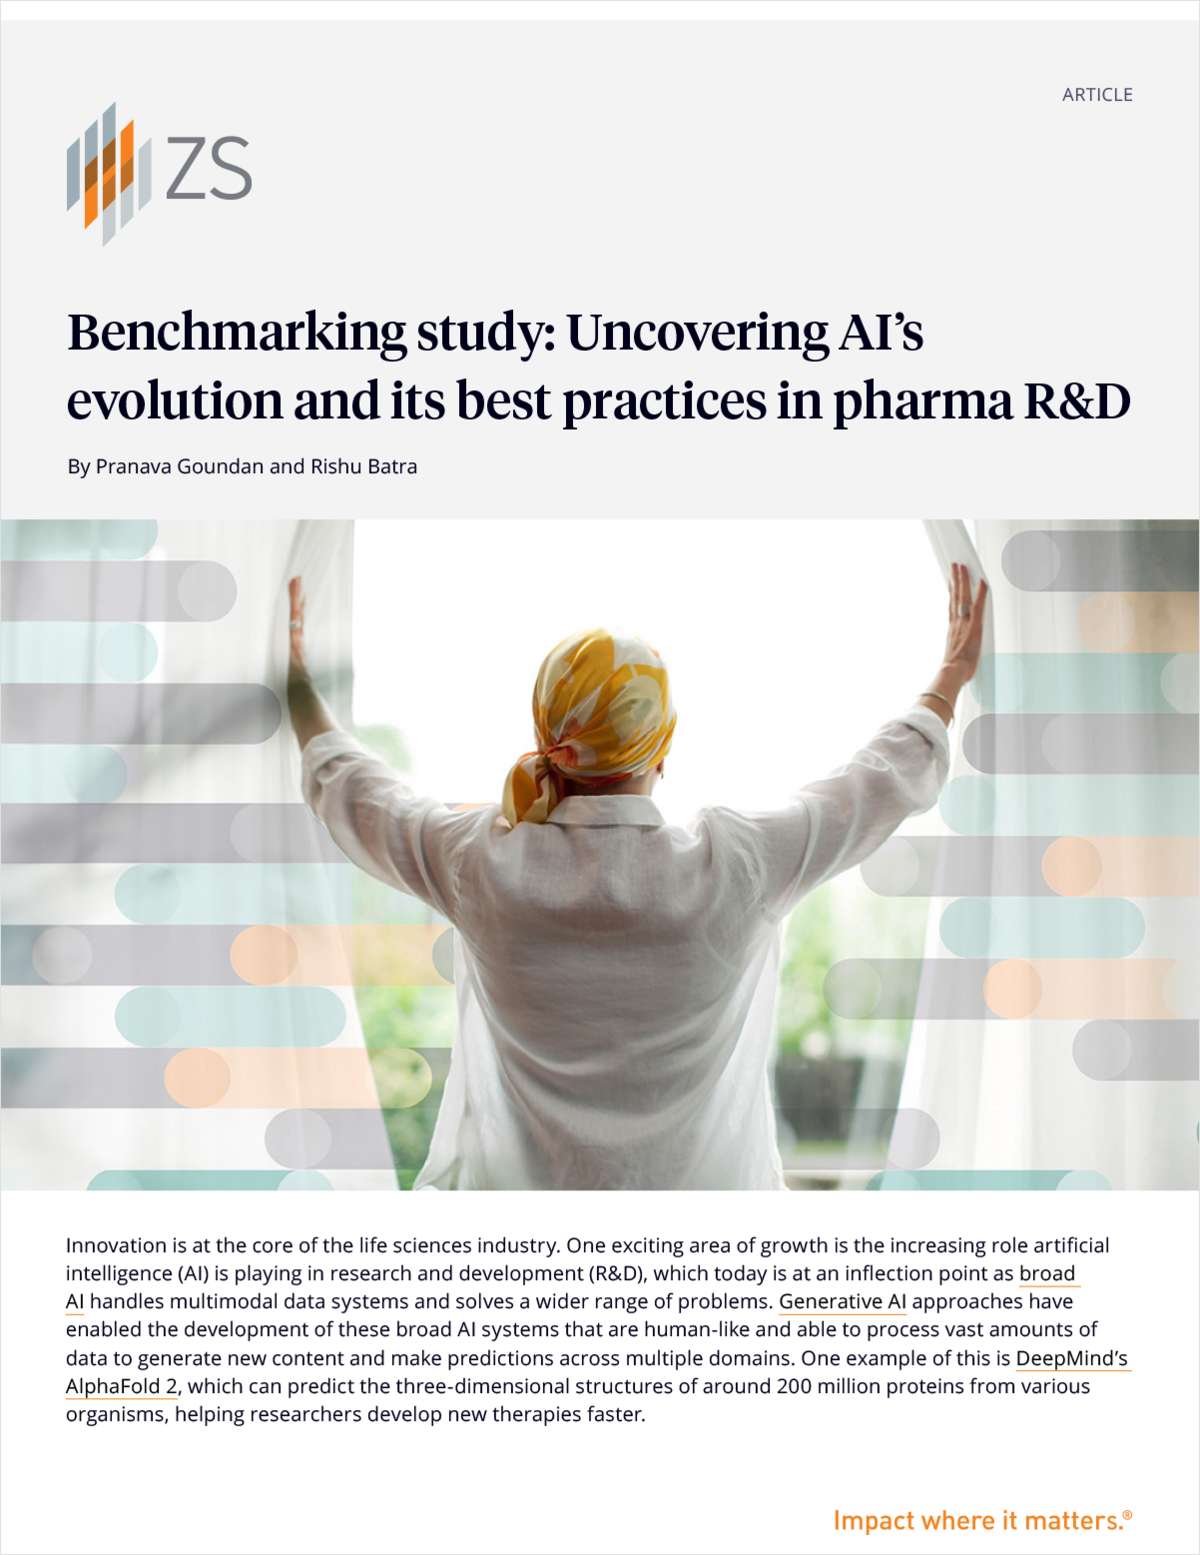 Uncovering AI's evolution and its best practices in pharma R&D